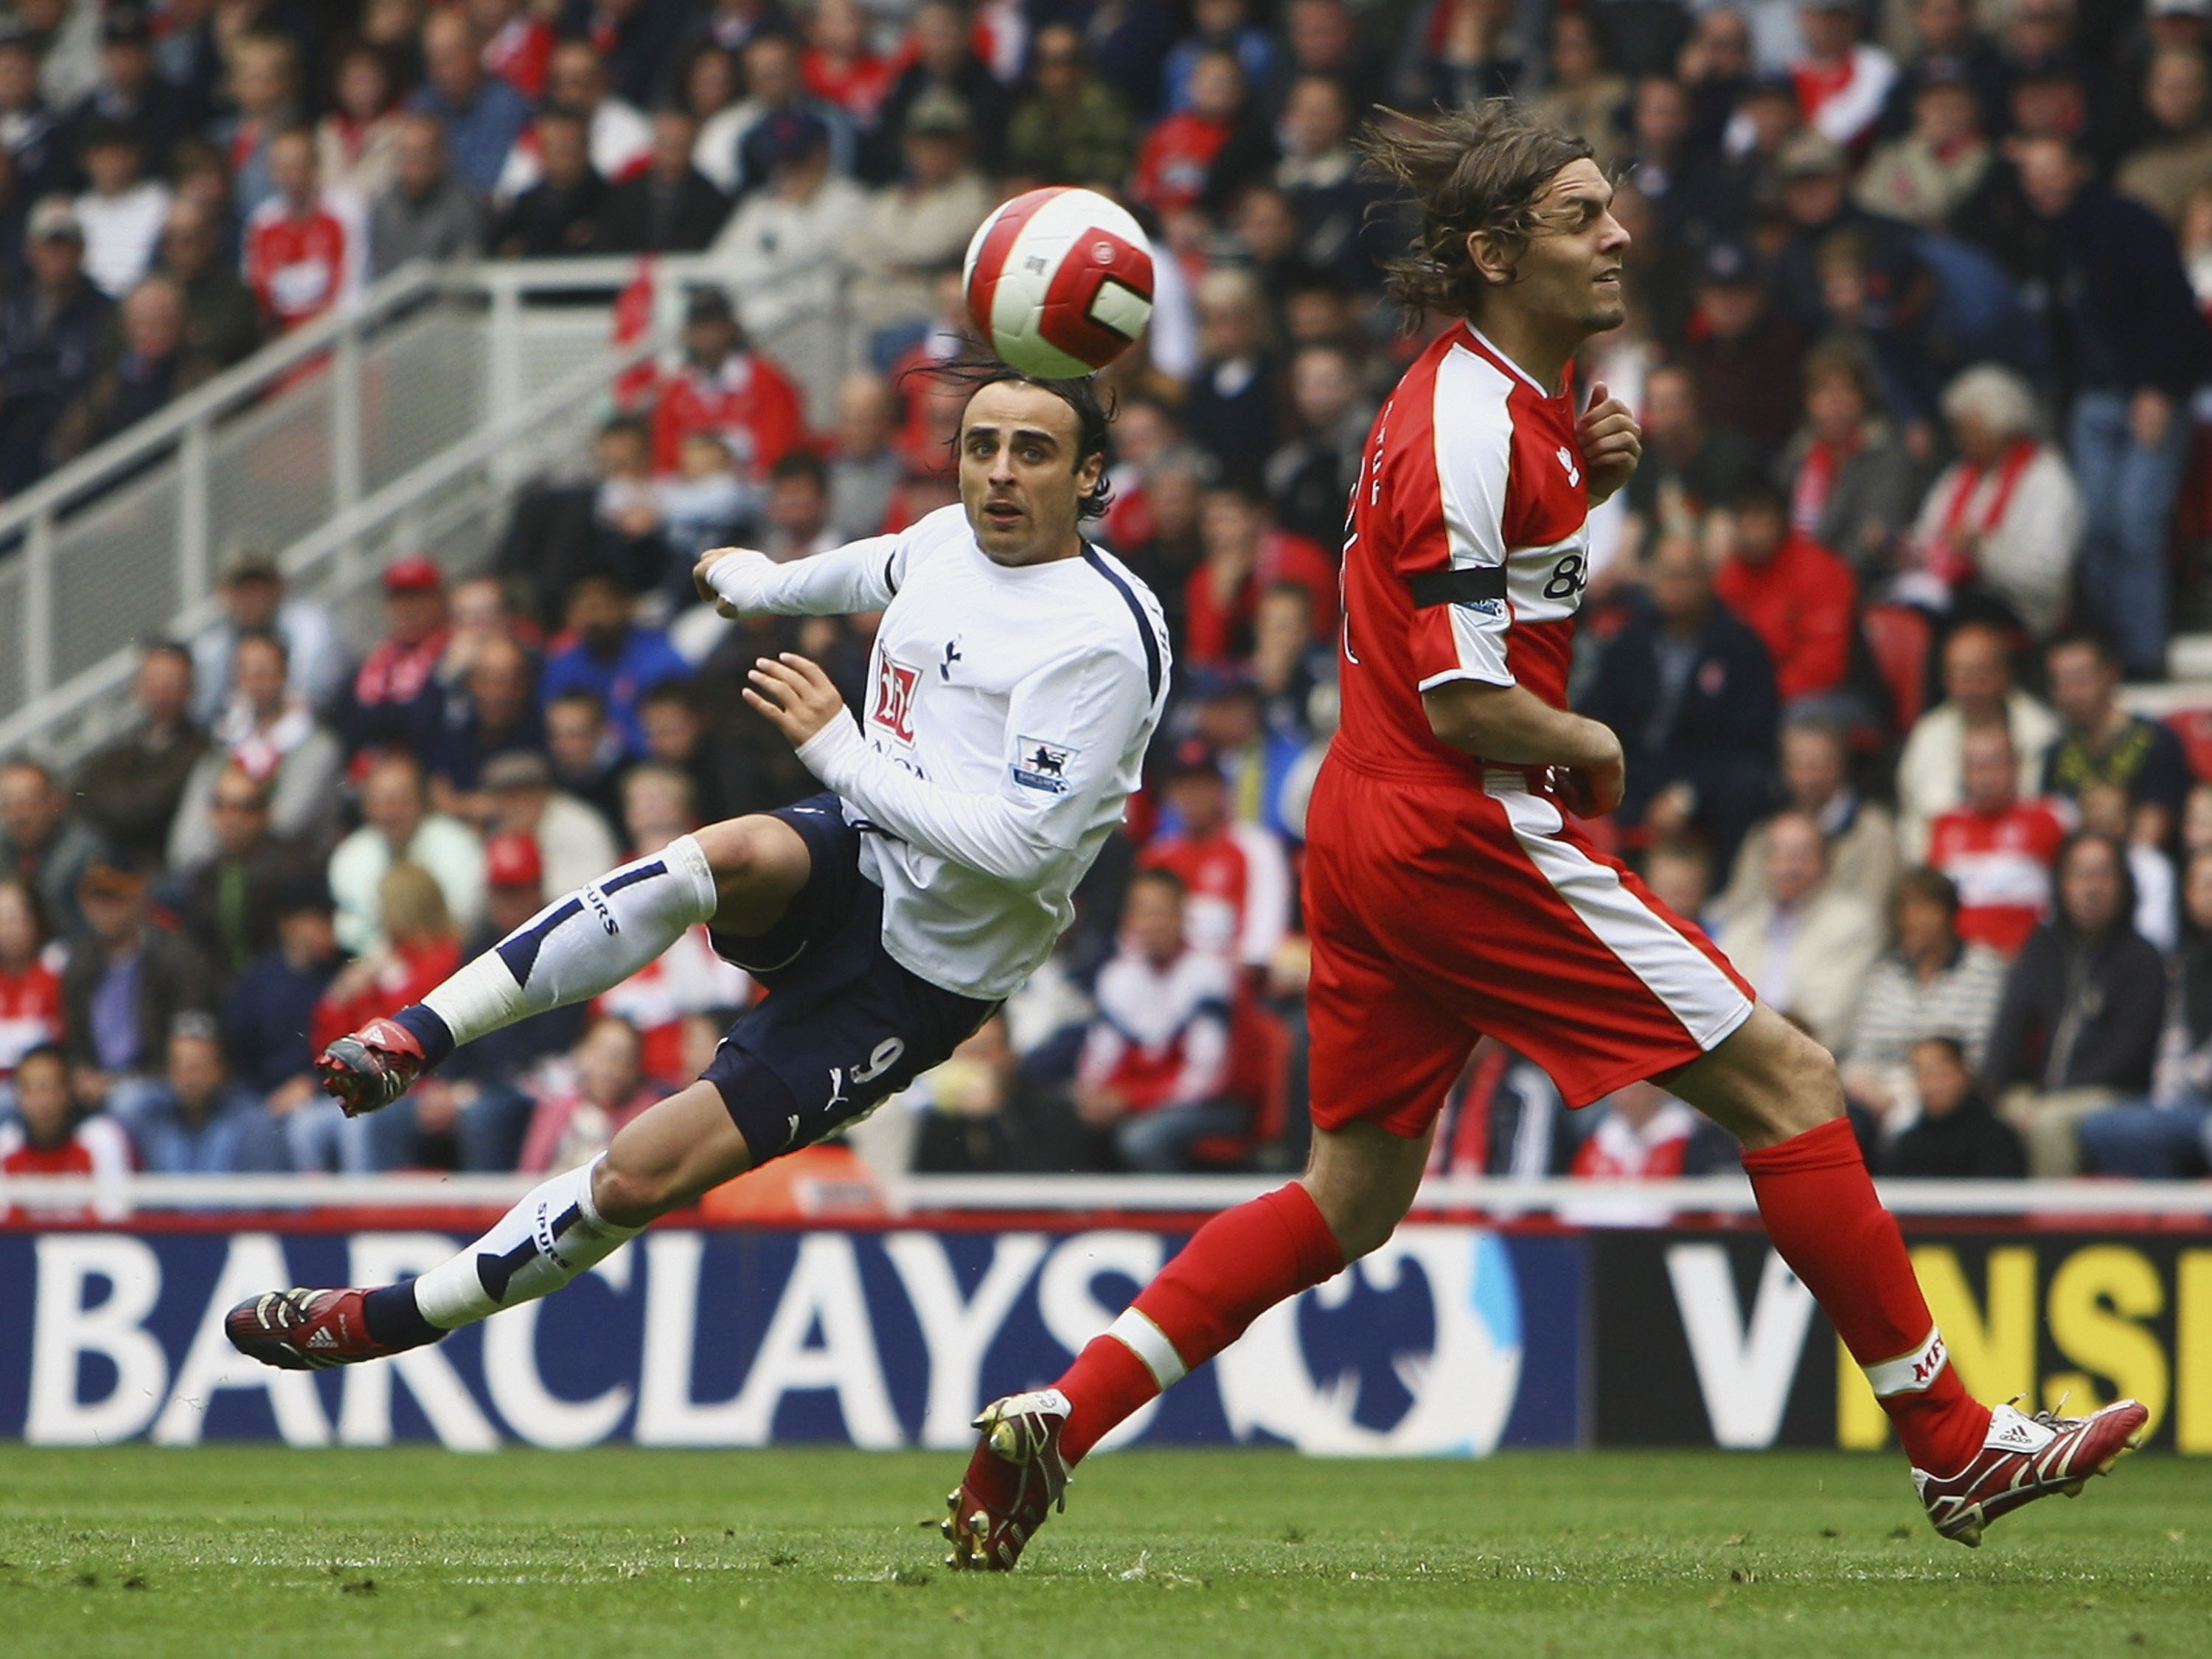 Dimitar Berbatov hits a volley for Tottenham against Middlesbrough in 2008.